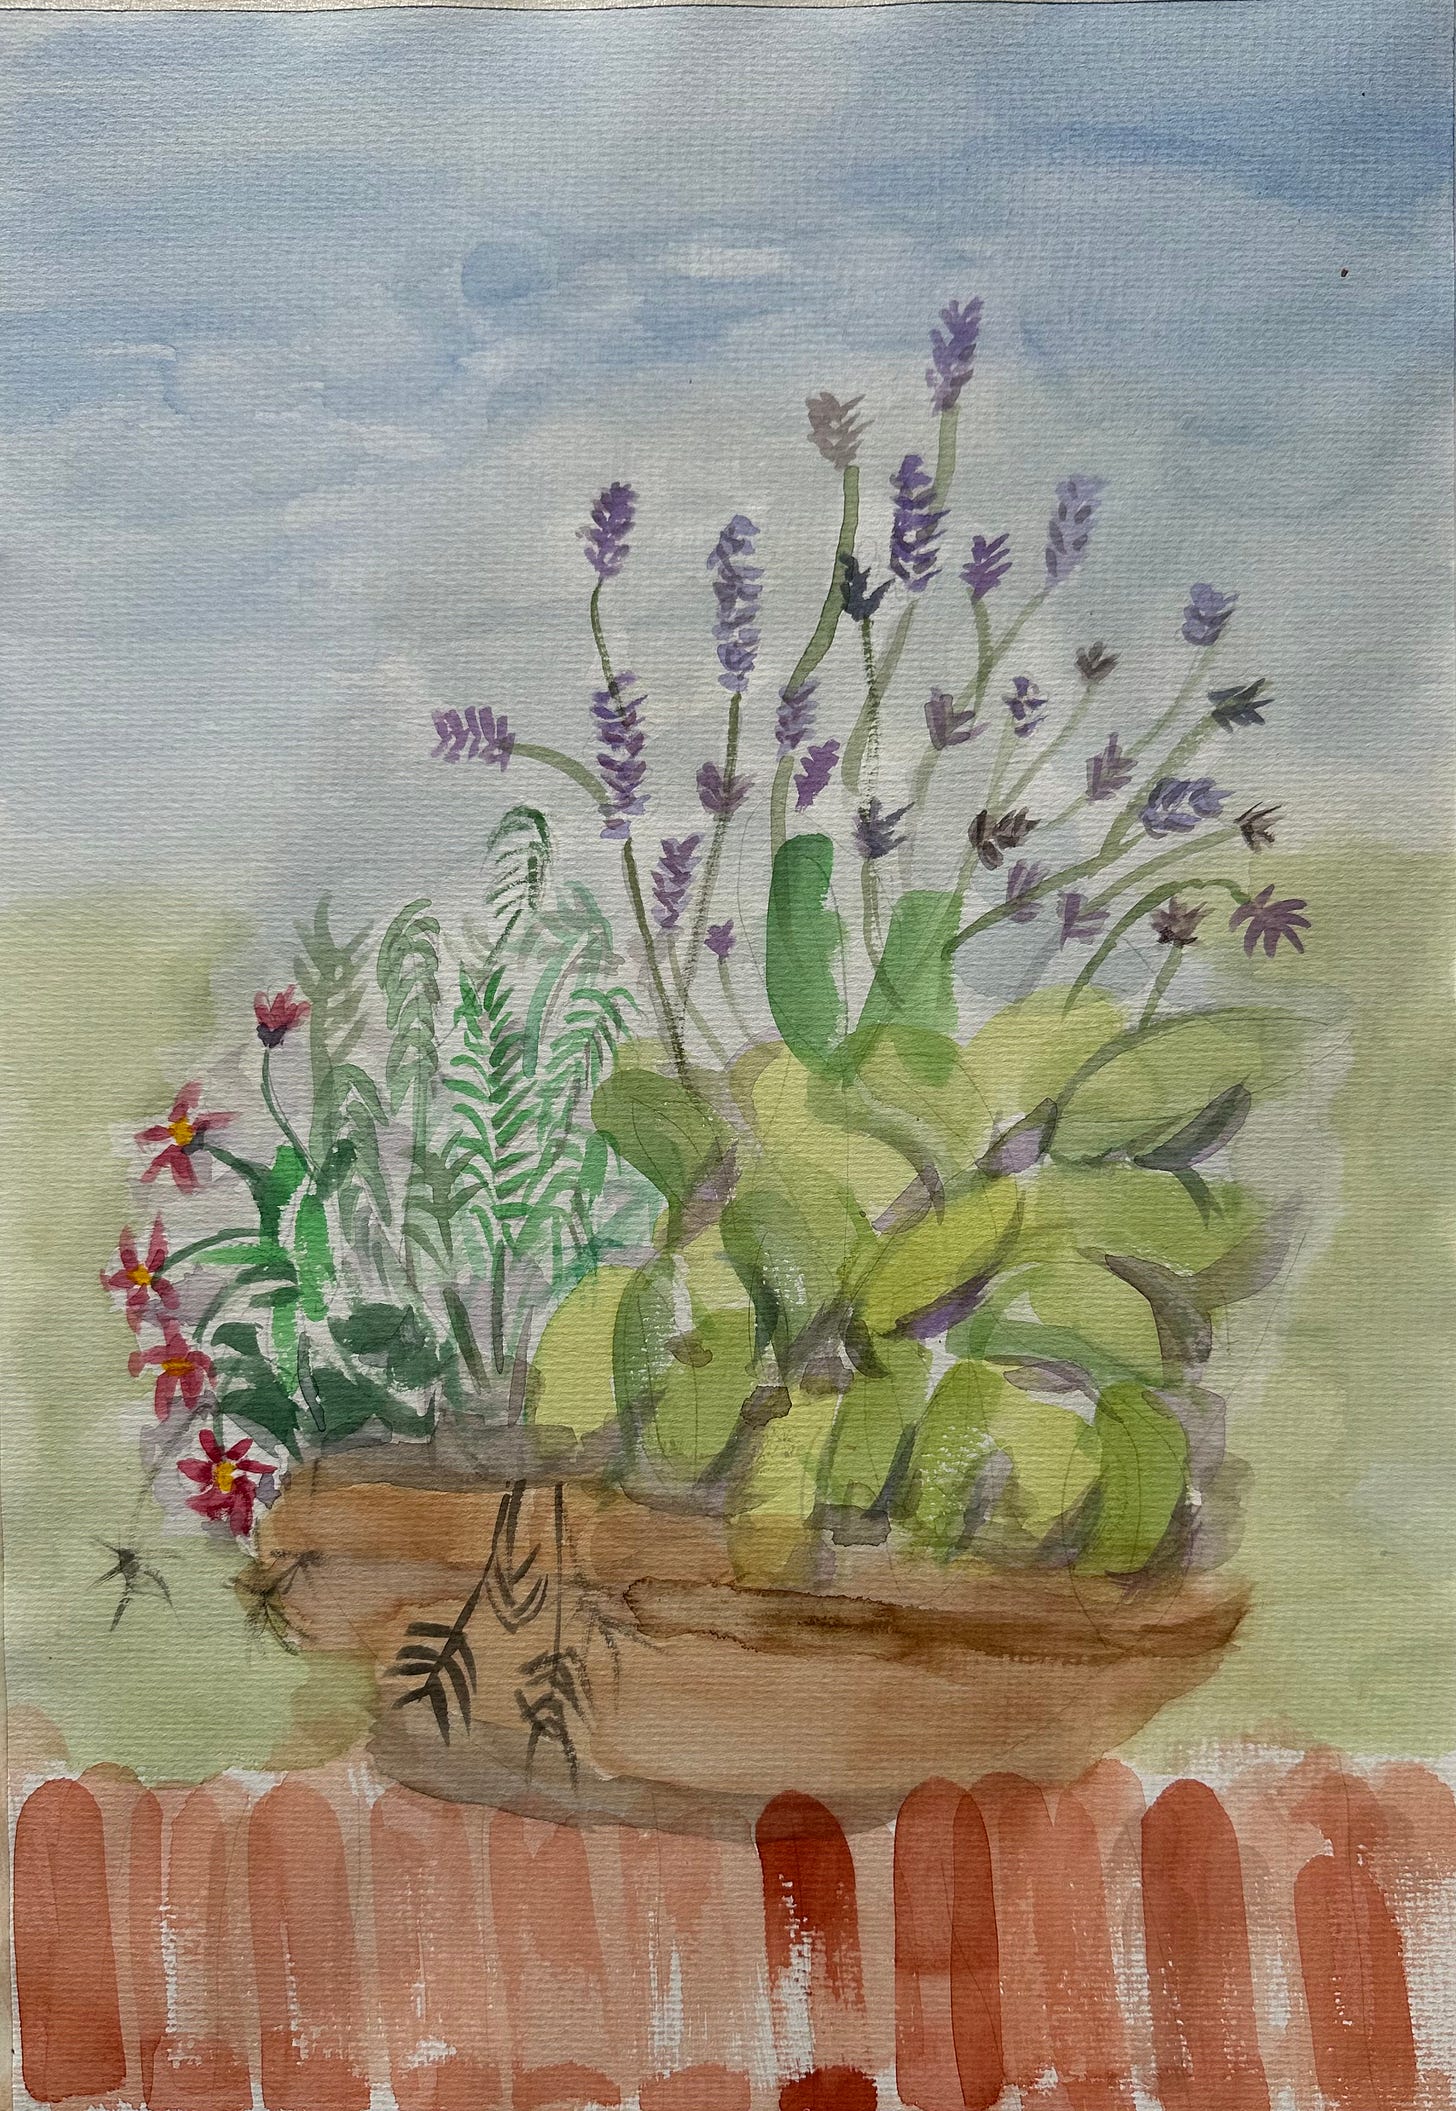 Image shows a watercolour sketch of a planter containing lavender and some herbs